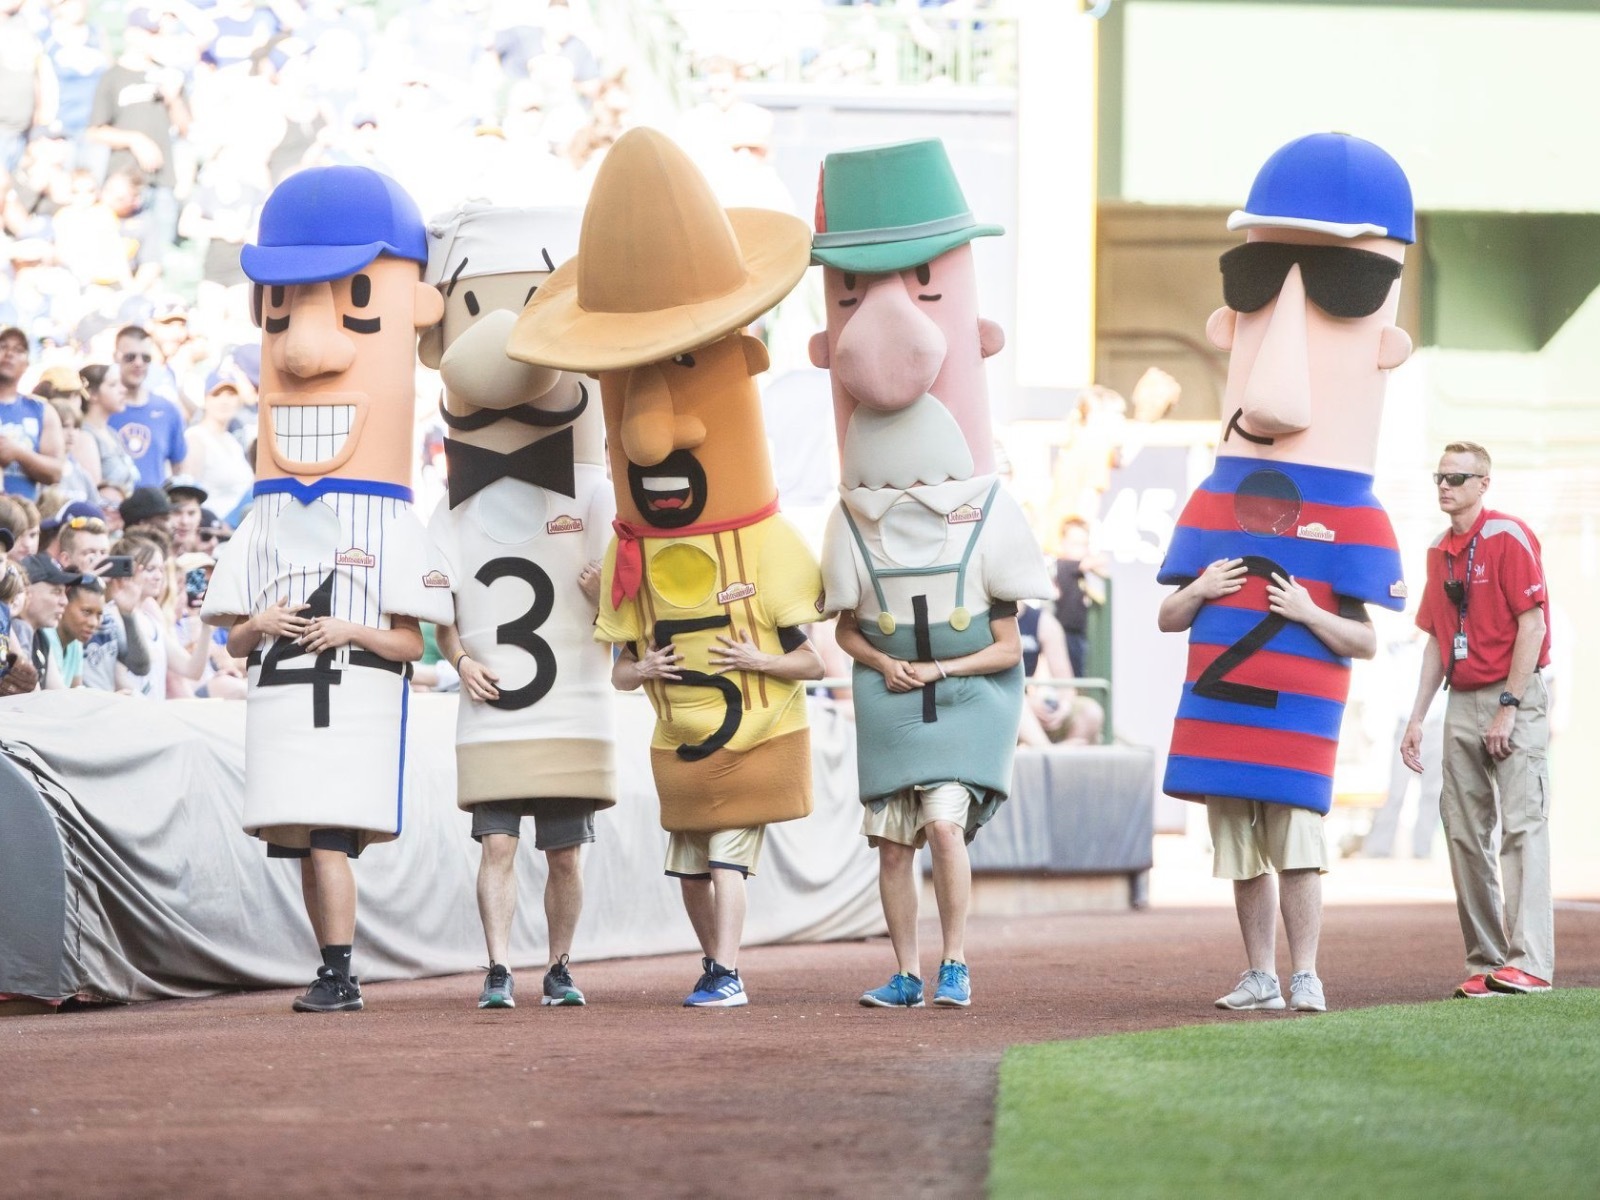 Racing Sausages with Bernie Brewer, mascot of the Milwaukee